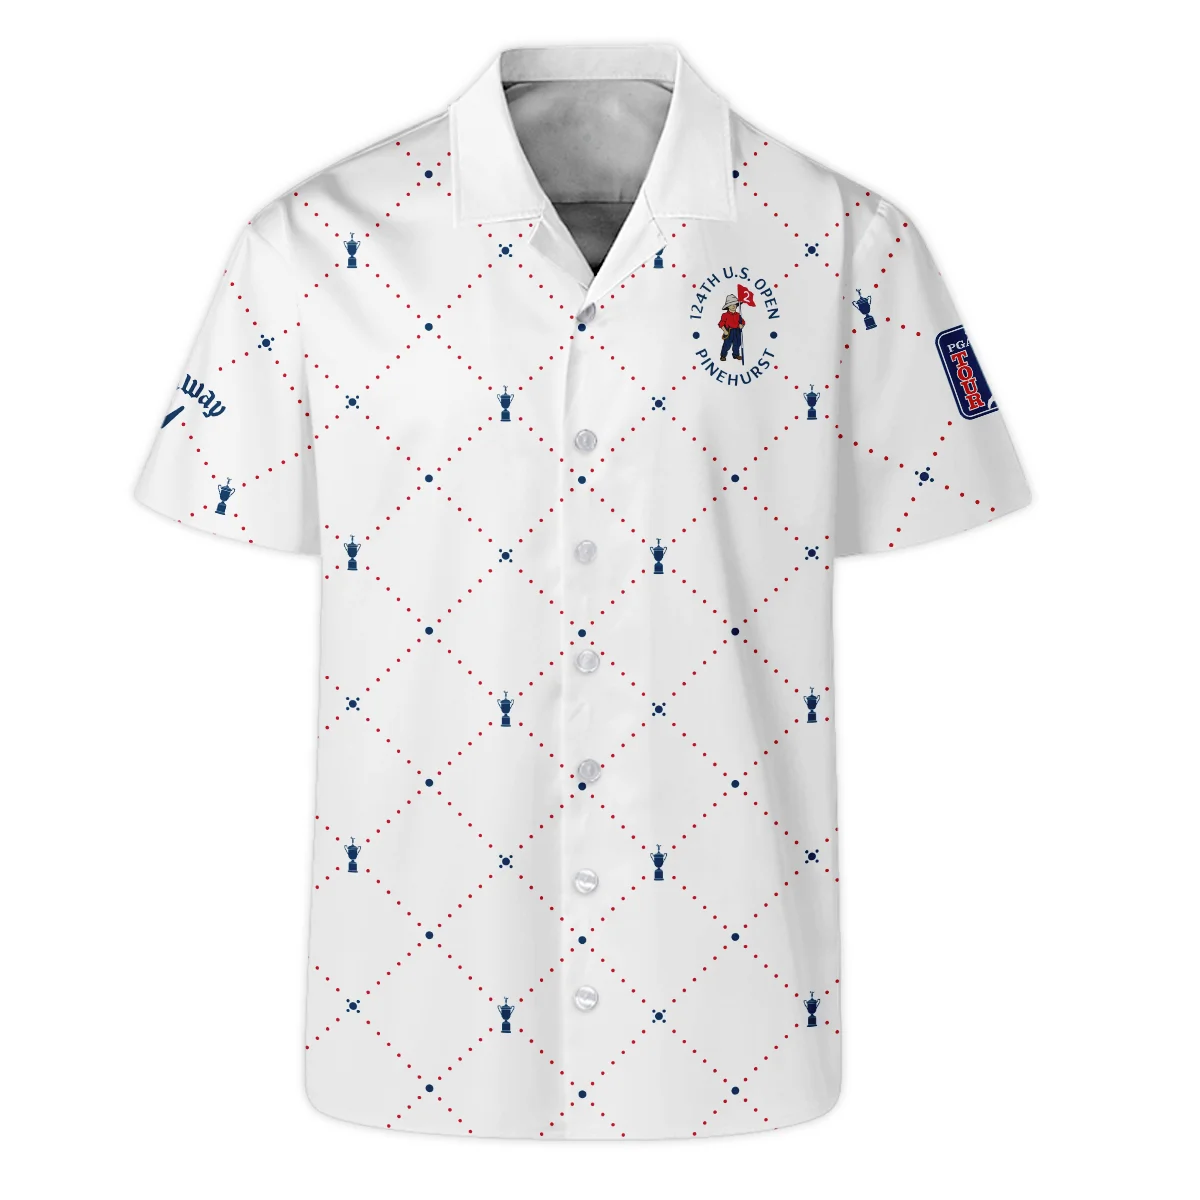 Argyle Pattern With Cup 124th U.S. Open Pinehurst Callaway Long Polo Shirt Style Classic Long Polo Shirt For Men